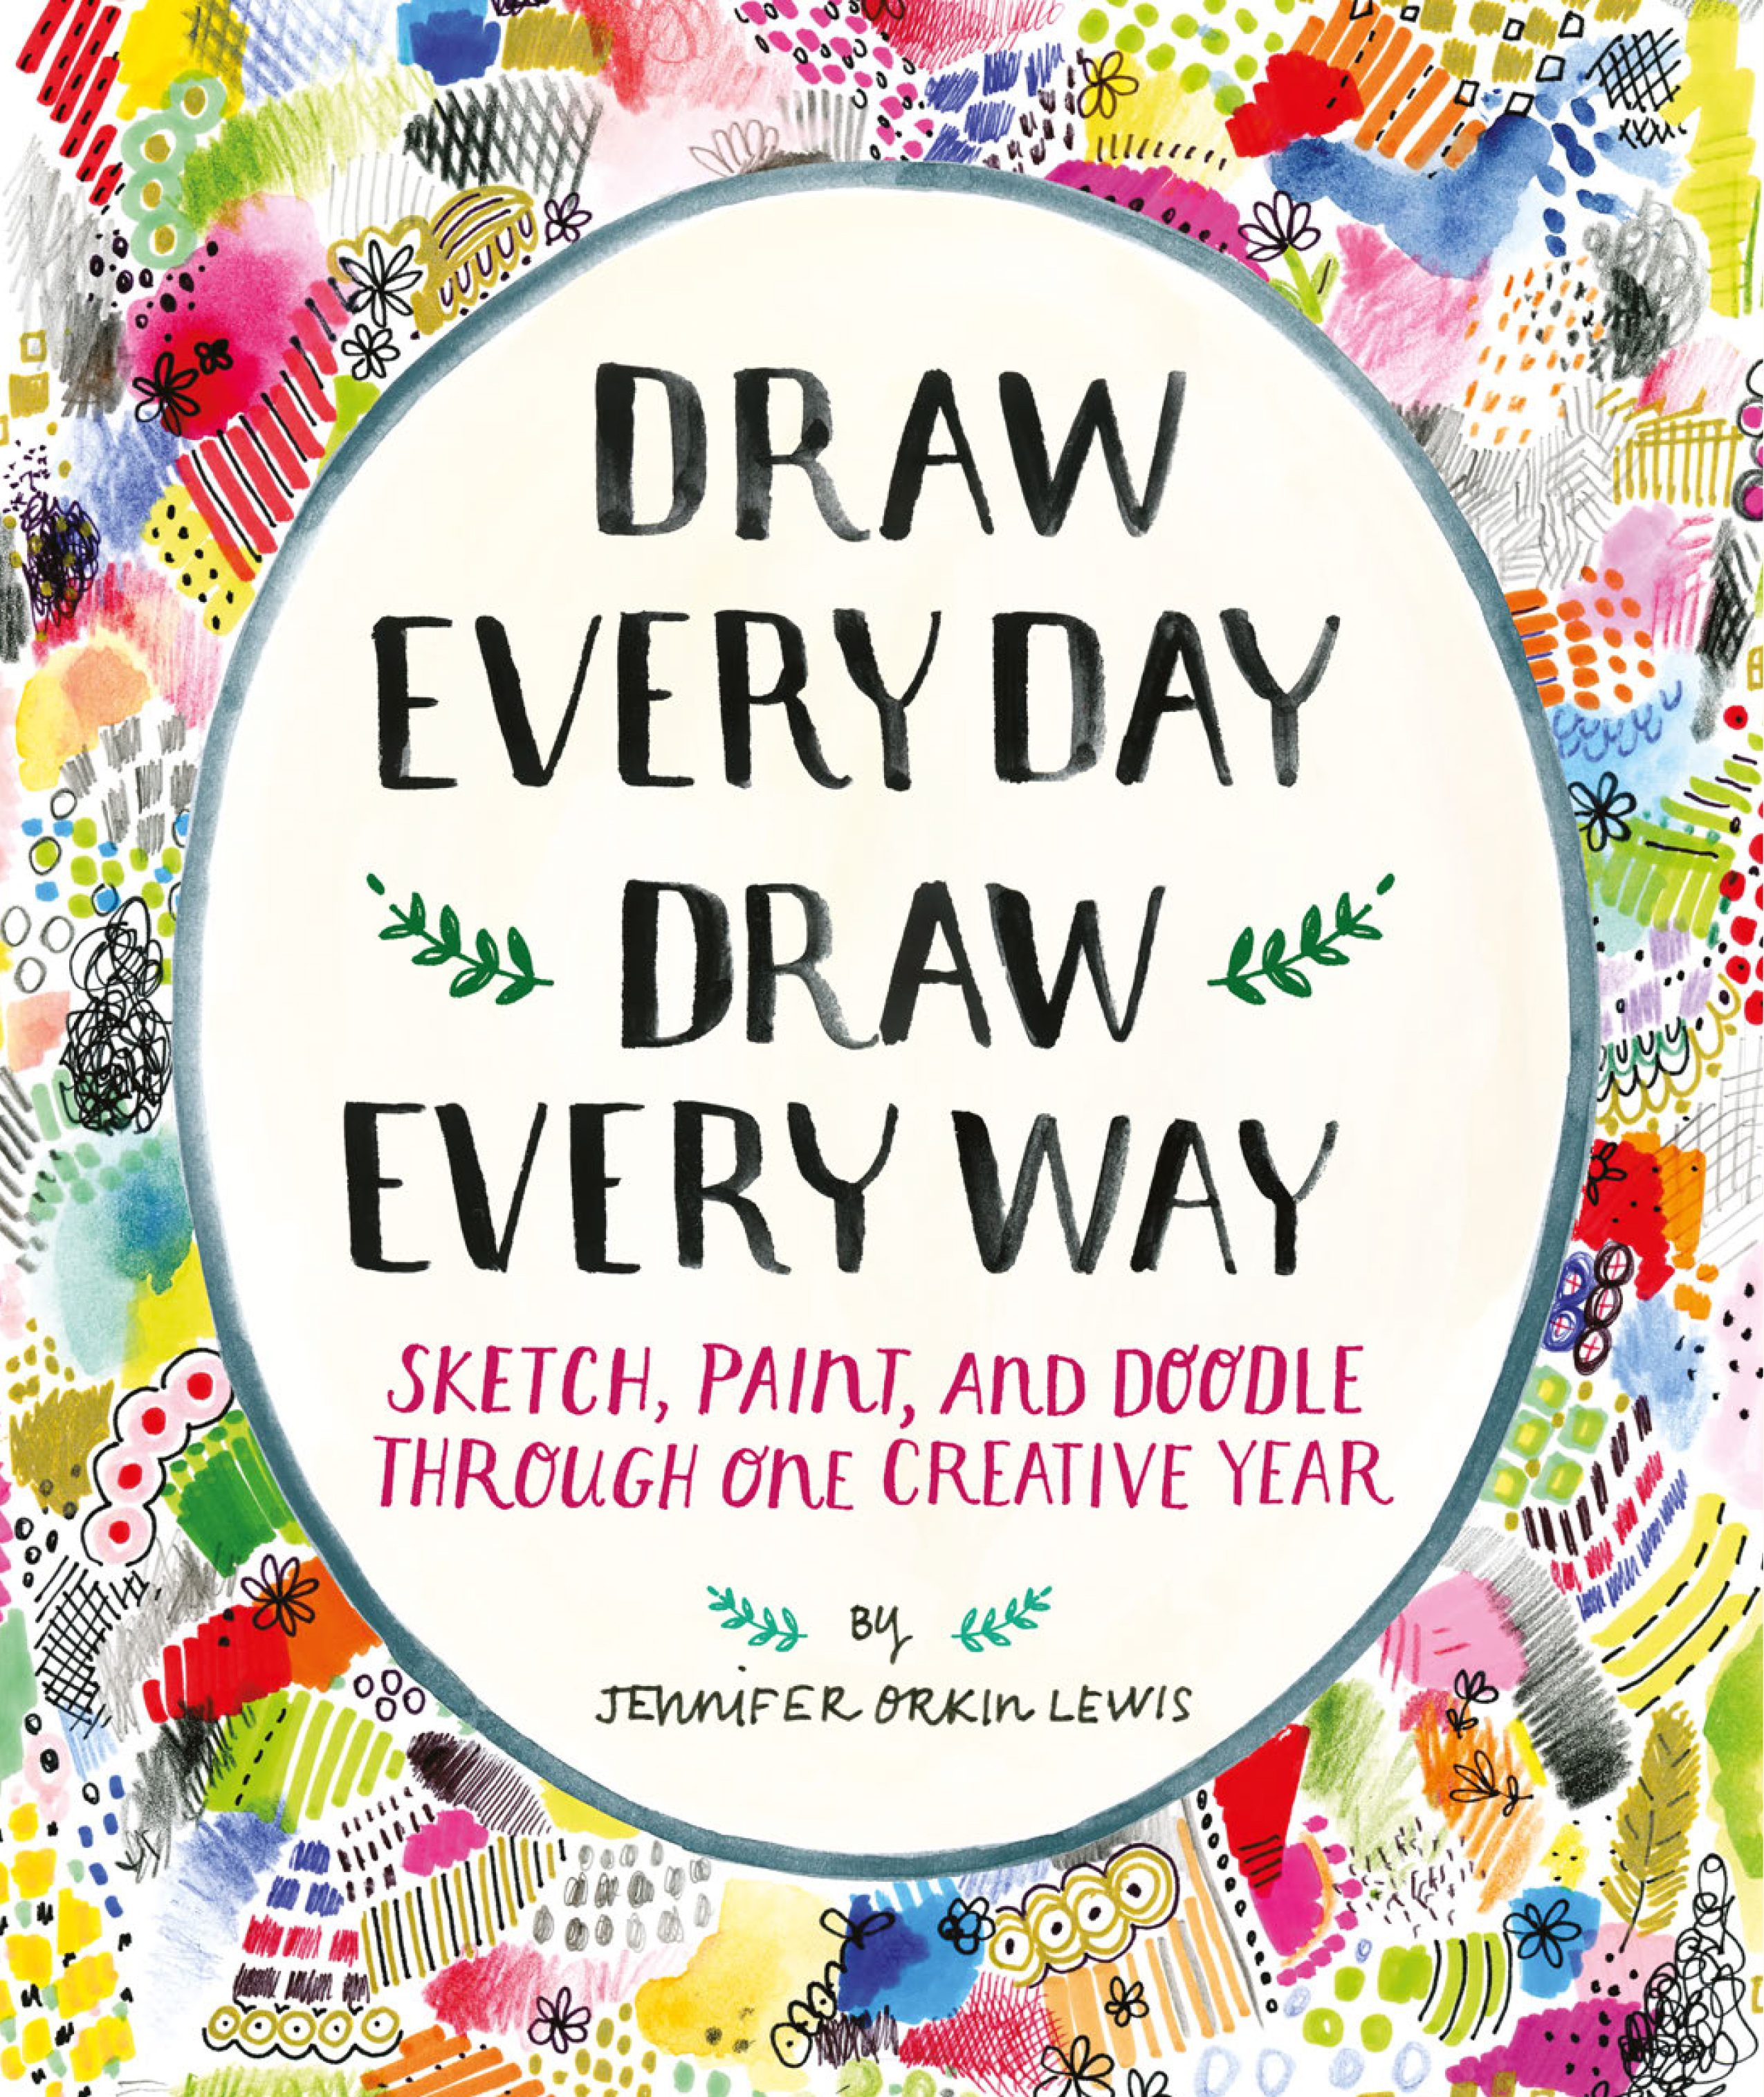 Book Launch: Draw Every Day Draw Every Way by Jennifer Orkin Lewis